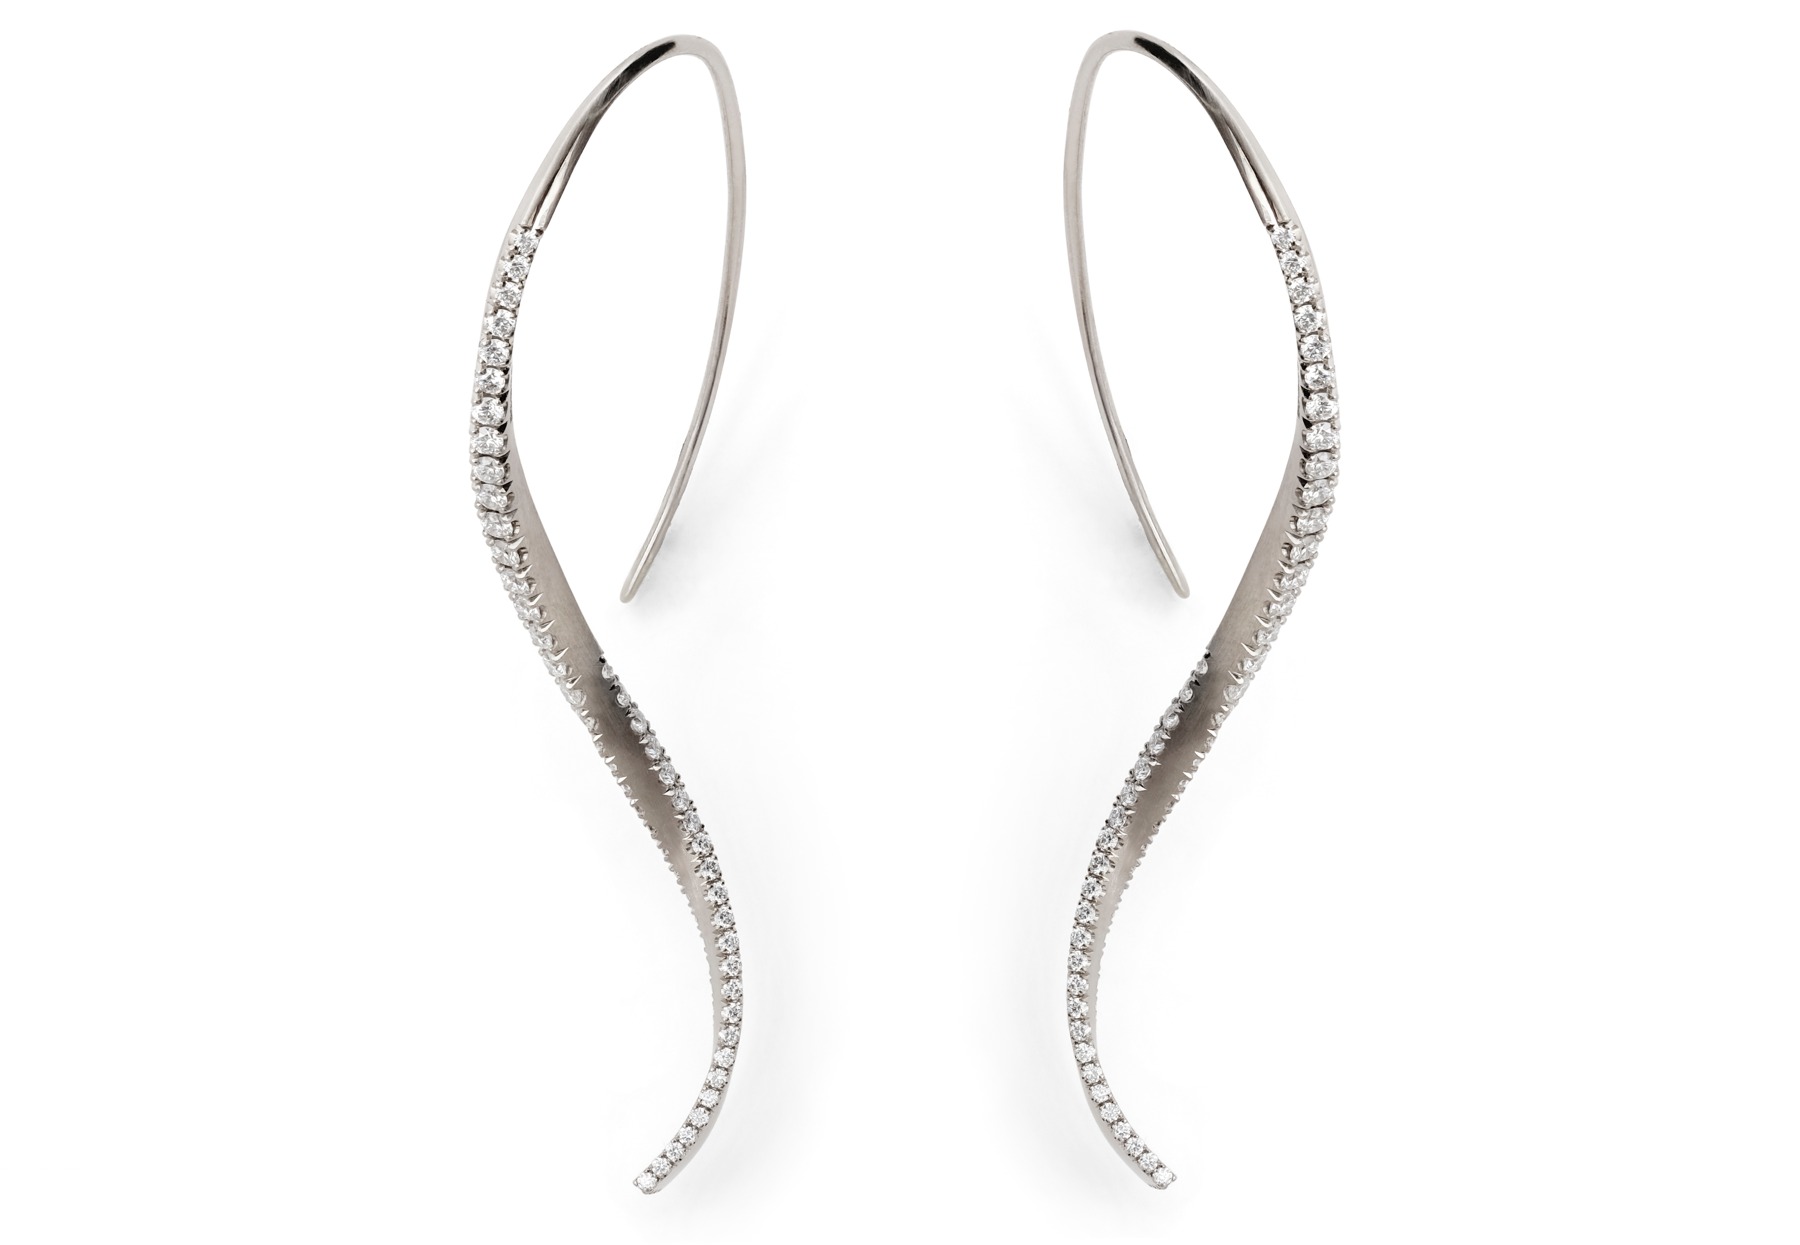 Hand forged white gold and diamond twisted drop earrings